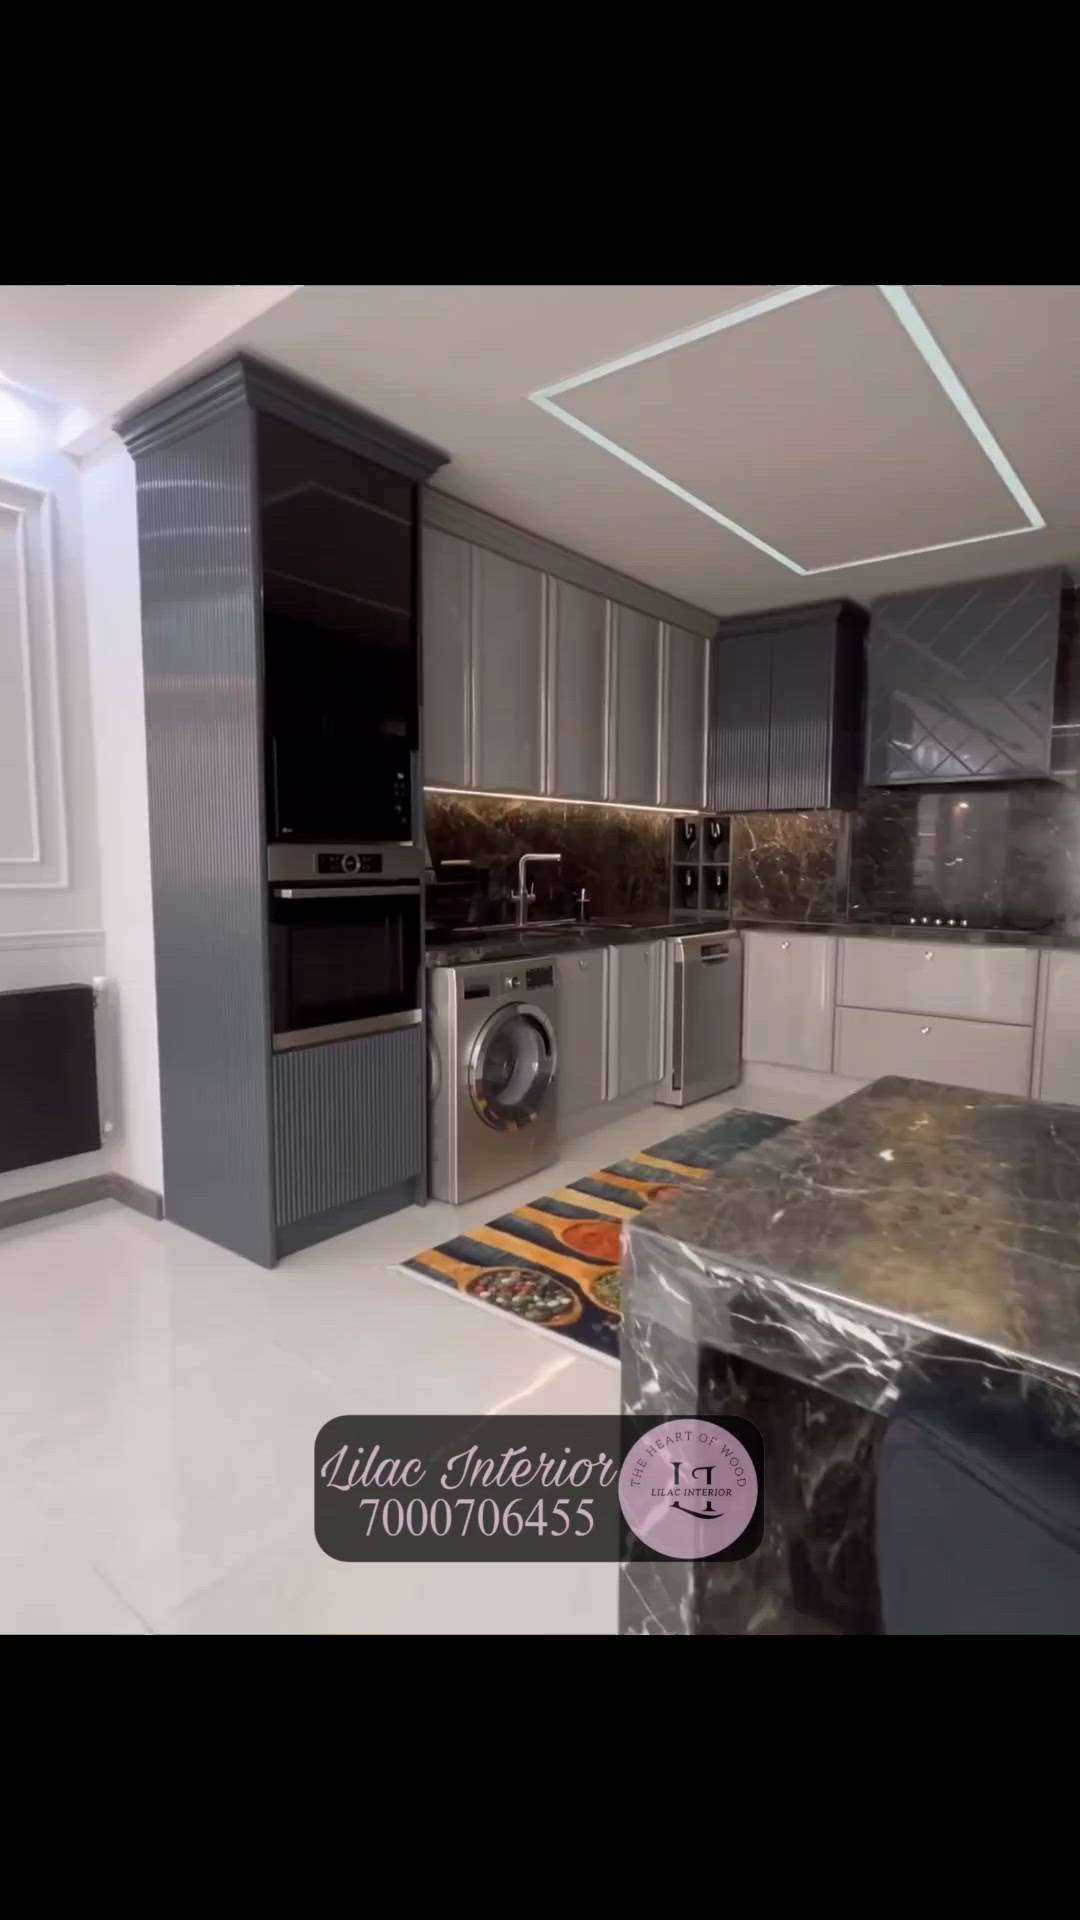 Modular Kitchen🤩❤️

📞Contact for work - 7000706455 , 7701821801, 9889720650

Looking for one-stop interior design solutions for your dream home or office? 😍
At Lilac Interior, we don't just build homes but craft your desires into fresh designs to make you fall in love with your home! ✨
Get your dream home designed by us 💫furniture
📩 Comment or DM ' smart ' to order

#interiordesign #designinterior #interiordesigner #designdeinteriores #interiordesignideas #interiordesigners #designerdeinteriores #interiordesigns
.

#interiordesign #designinterior #interiordesigner #designdeinteriores #interiordesignideas #interiordesigners #designerdeinteriores #interiordesigns #interiordesigninspiration #interioresdesign #designdeinterior #interiors
#OpenKitchnen #openspace #ModularKitchen #noidainterior #noidakitchen #Delhihome #delhiinteriors #delhiinteriordesigner #DecorIdeas #kitchendecor #openkitchendesign #handmadekitchen #delhiinteriors #noidaintreor #noidainterior #LargeKitchen #modular